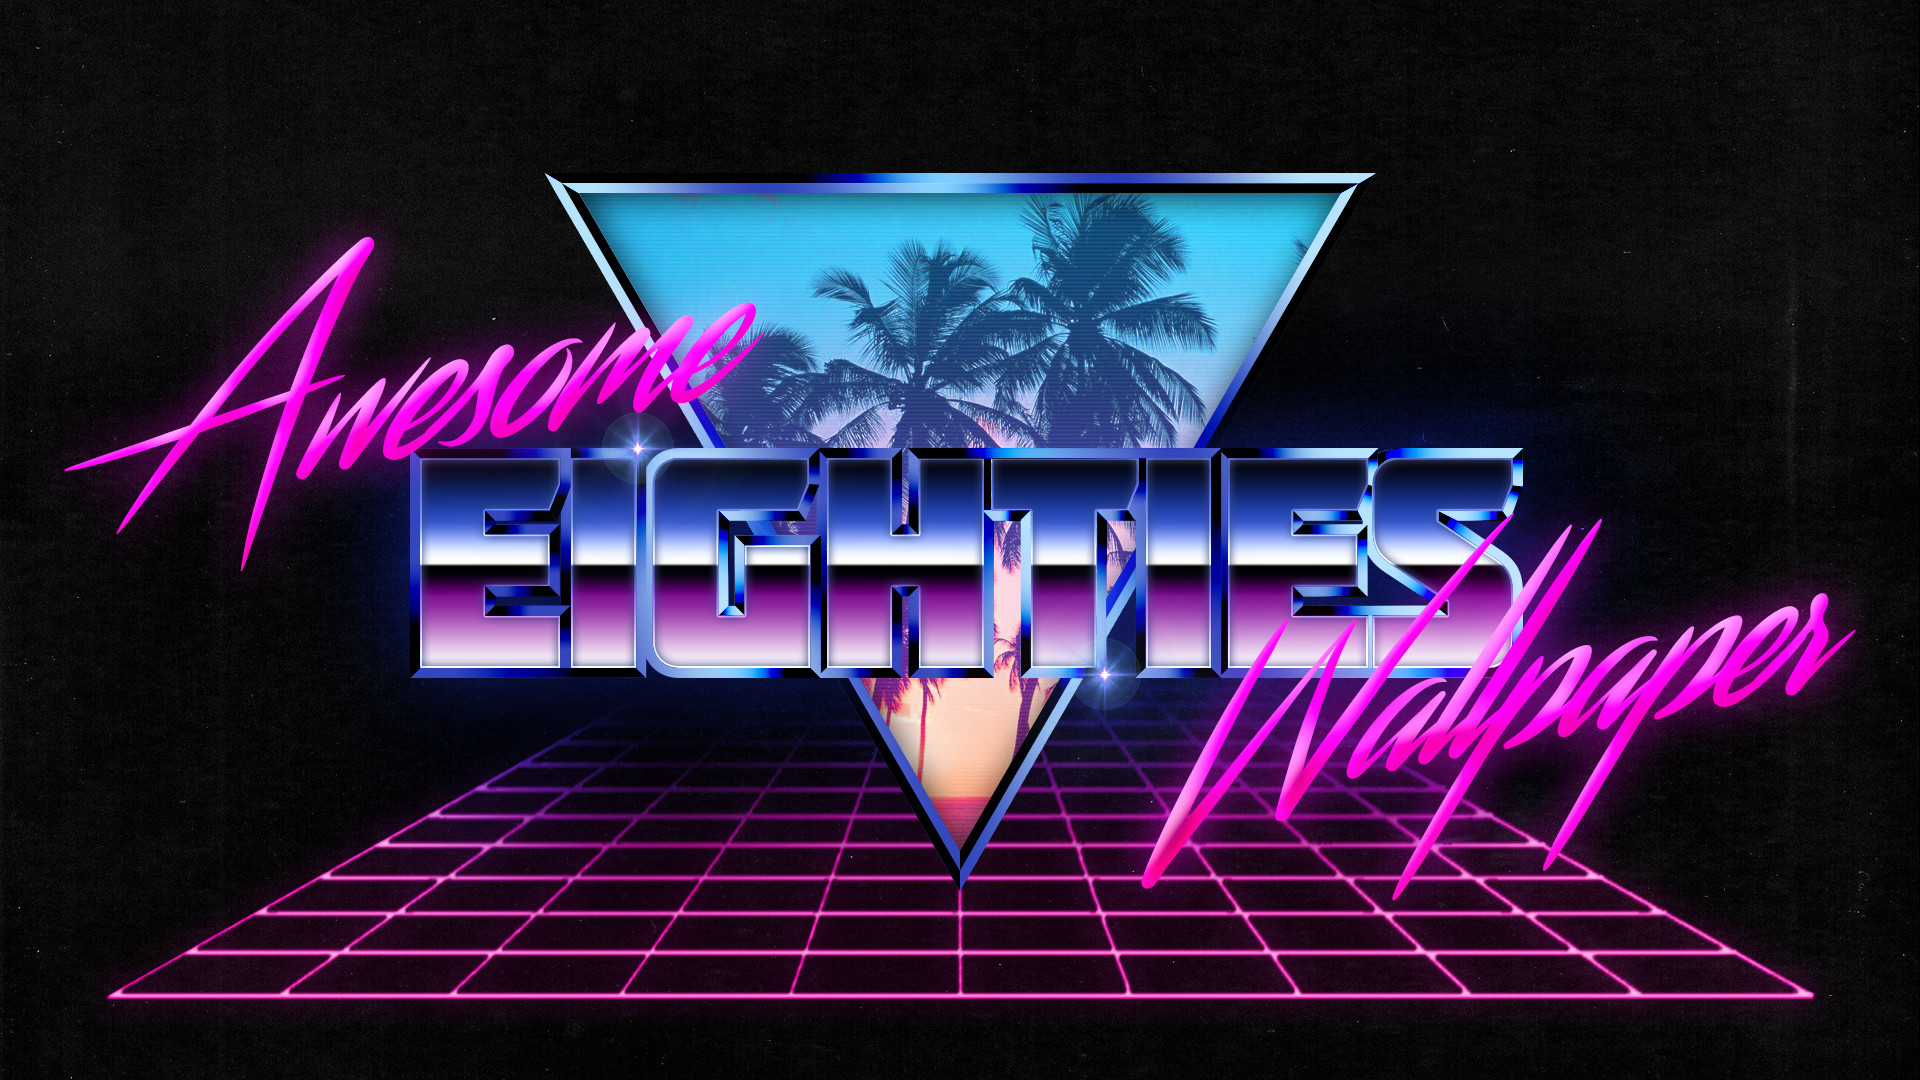 Awesome 80s Wallpaper by valithevali Awesome 80s Wallpaper by valithevali